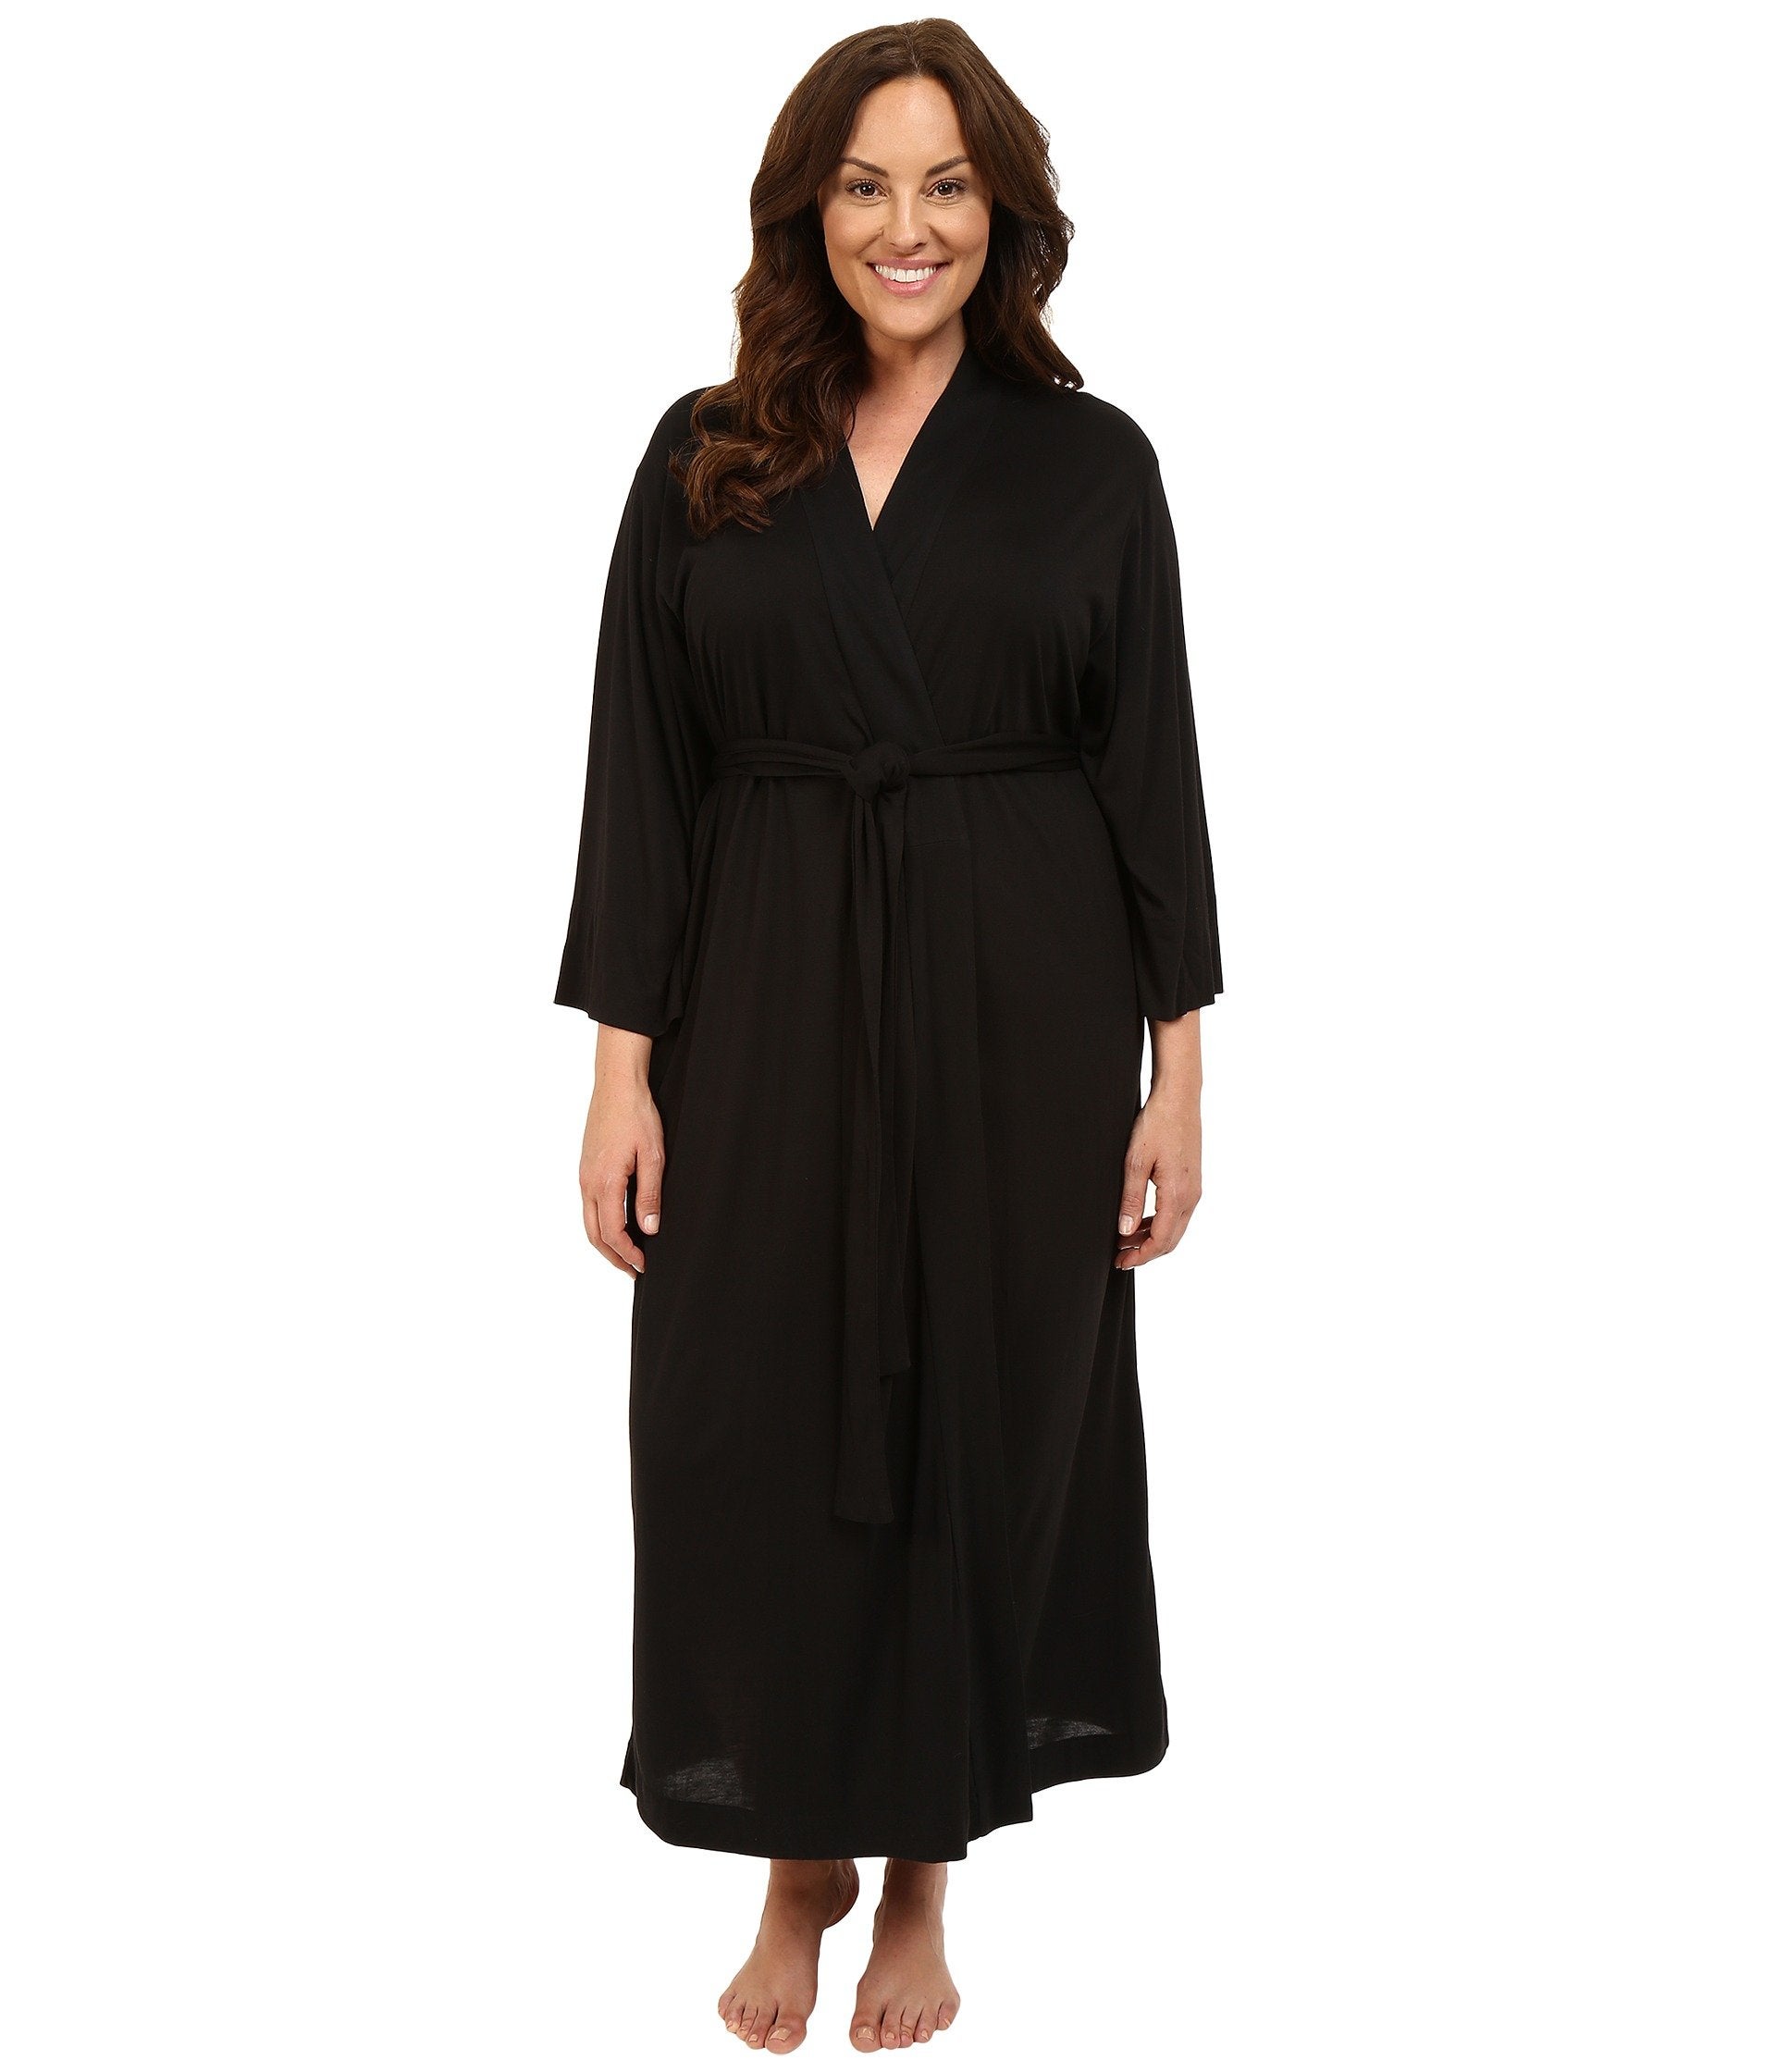 Cozy Plus Size Robes Perfect For Your ...